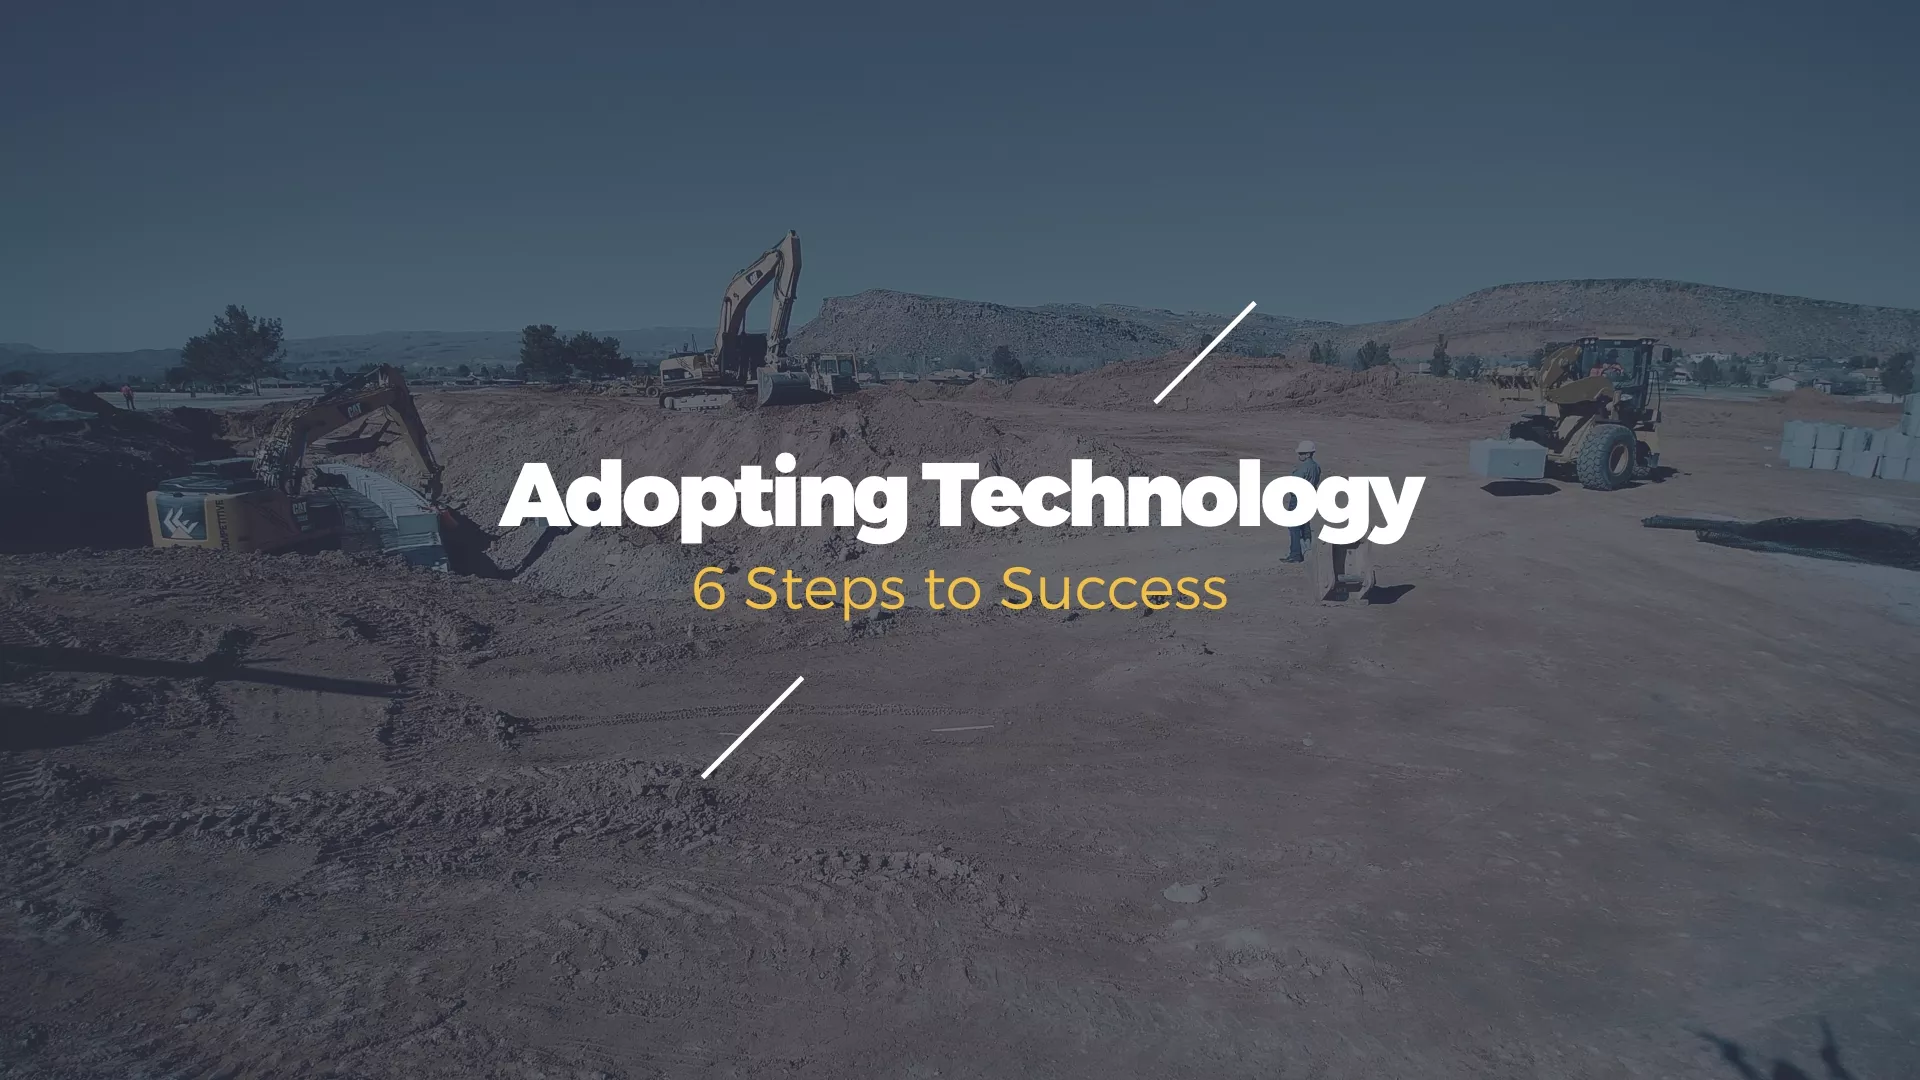 View our on-demand construction webinar about technology adoption in construction In 6 steps